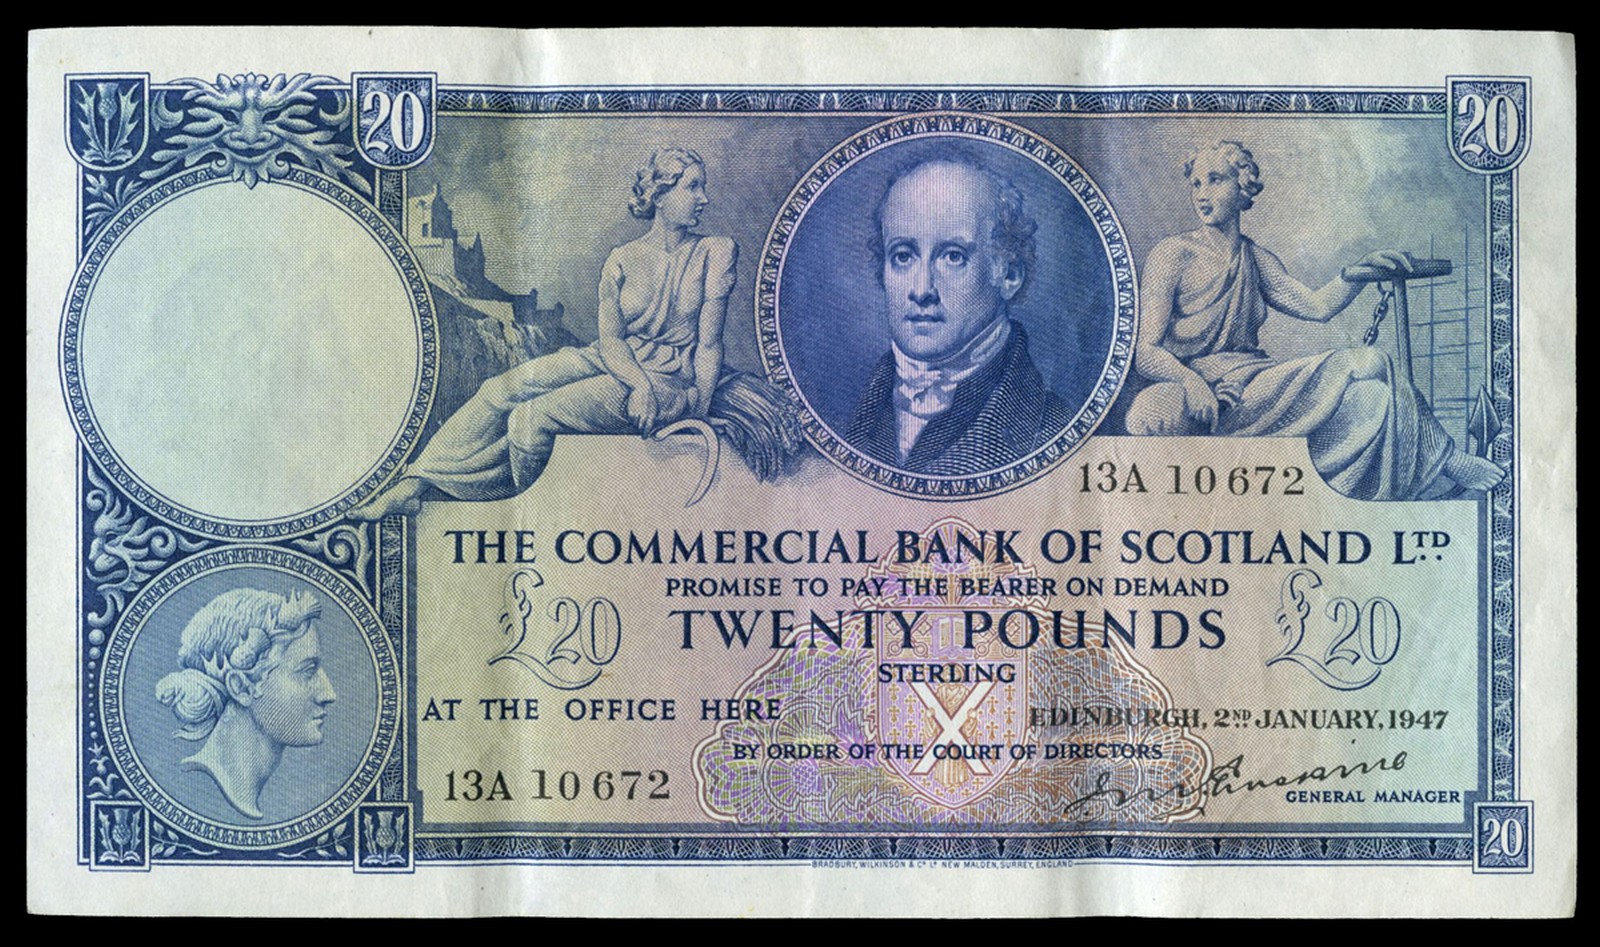 BRITISH BANKNOTES, The Commercial Bank of Scotland Ltd, Twenty Pounds, 2 January 1947, 13/A 10672,